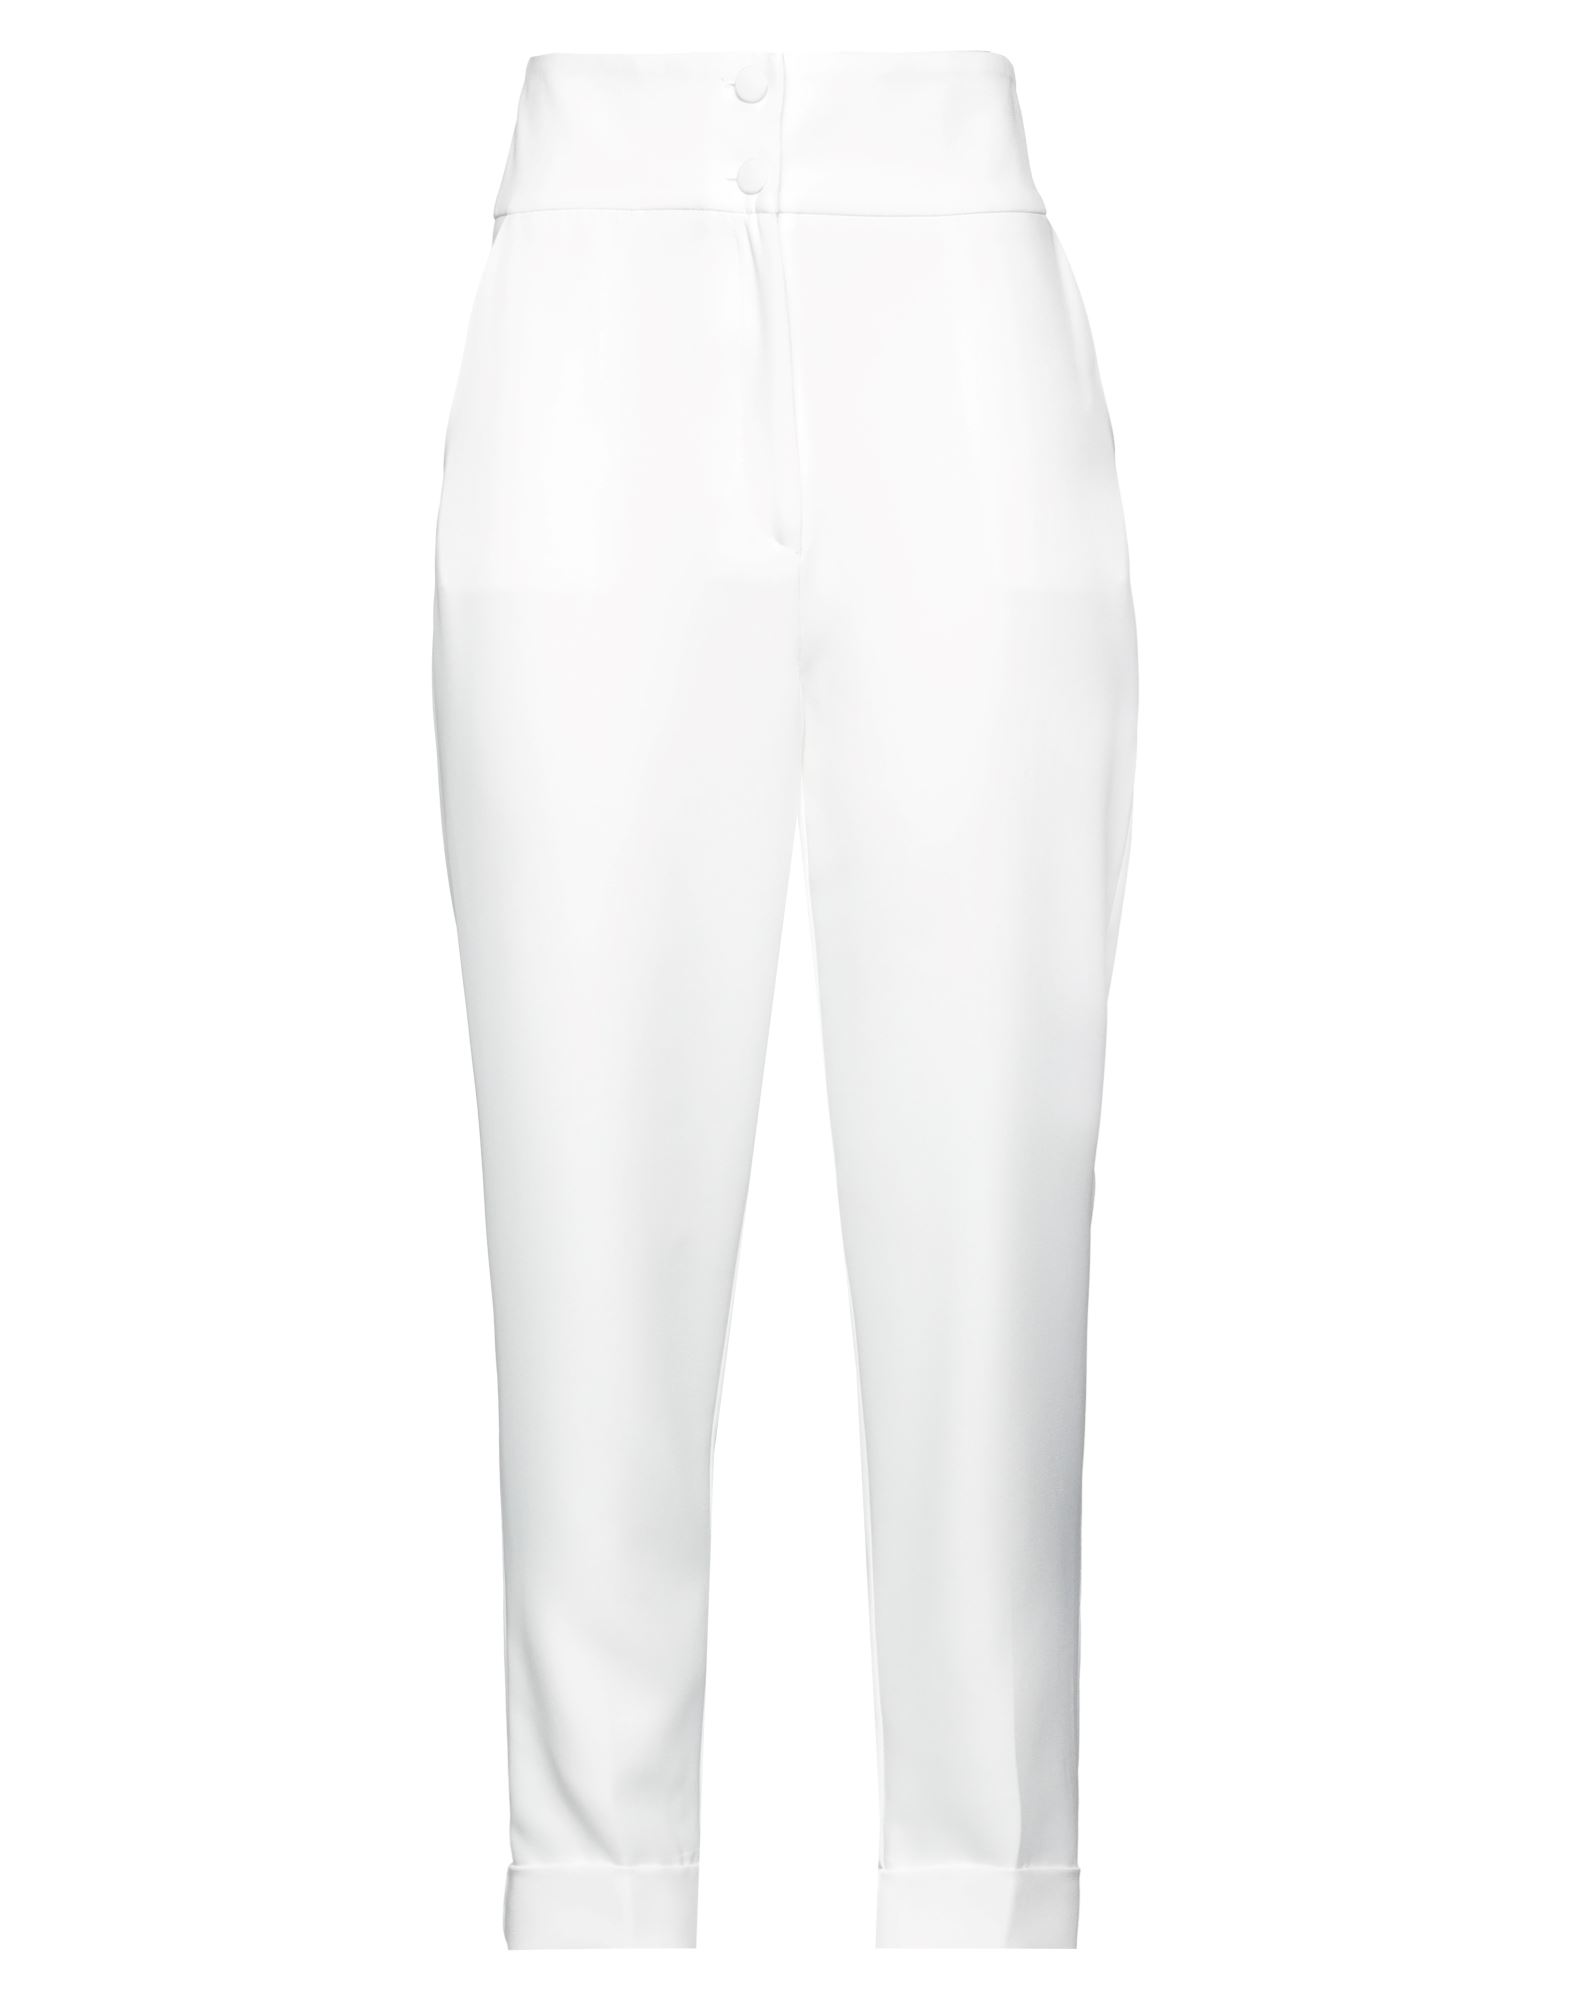 ACTUALEE ACTUALEE WOMAN PANTS IVORY SIZE 6 POLYESTER, ELASTANE